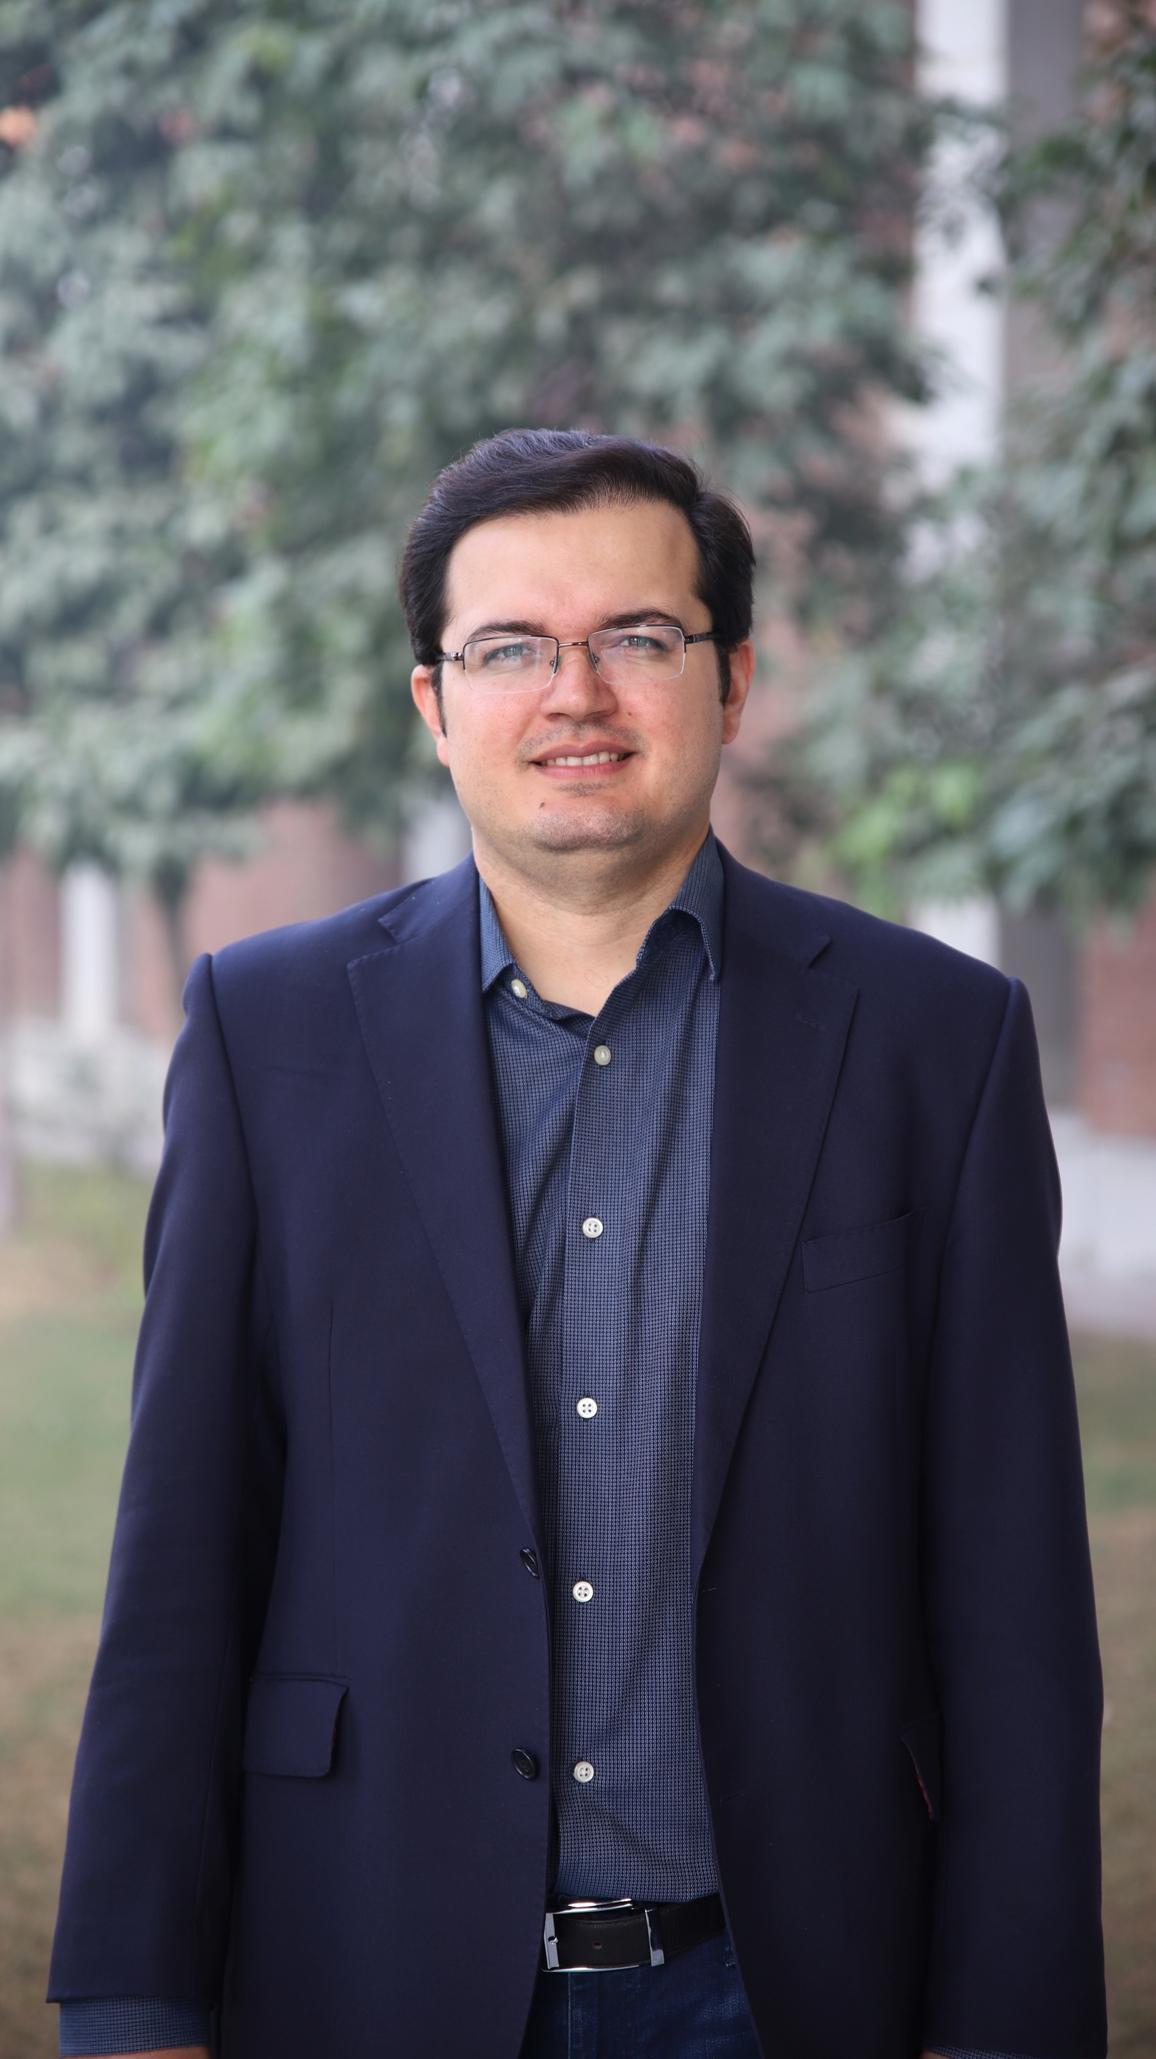 LUMS FACULTY WIN FACEBOOK INTEGRITY FOUNDATIONAL RESEARCH AWARD